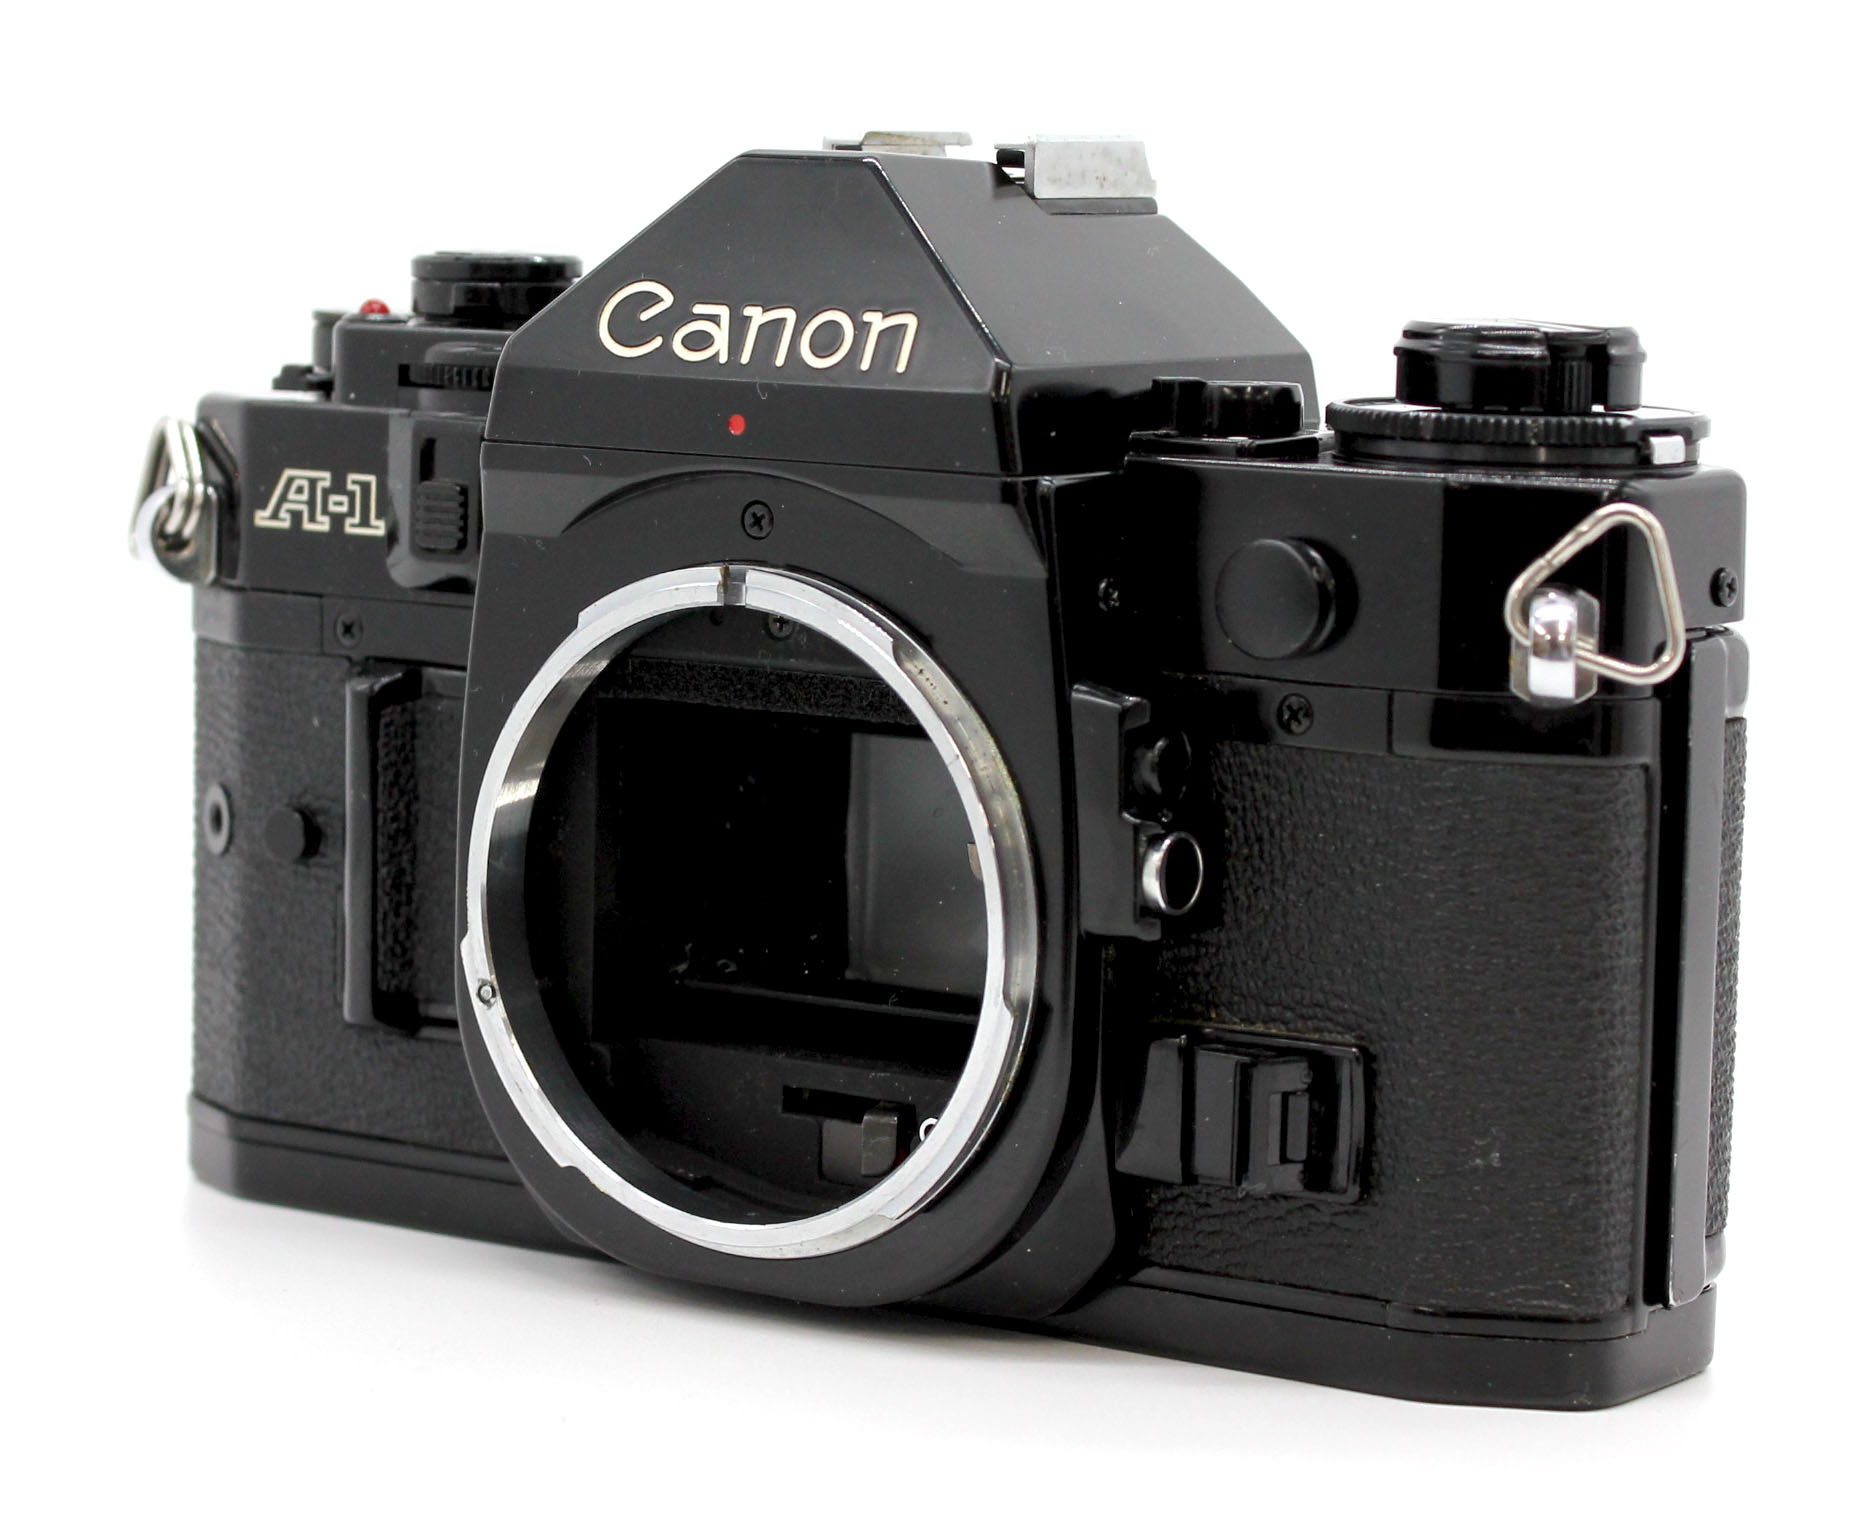  Canon A-1 35mm SLR Film Camera with FD 50mm F/1.4 S.S.C. Lens from Japan Photo 1